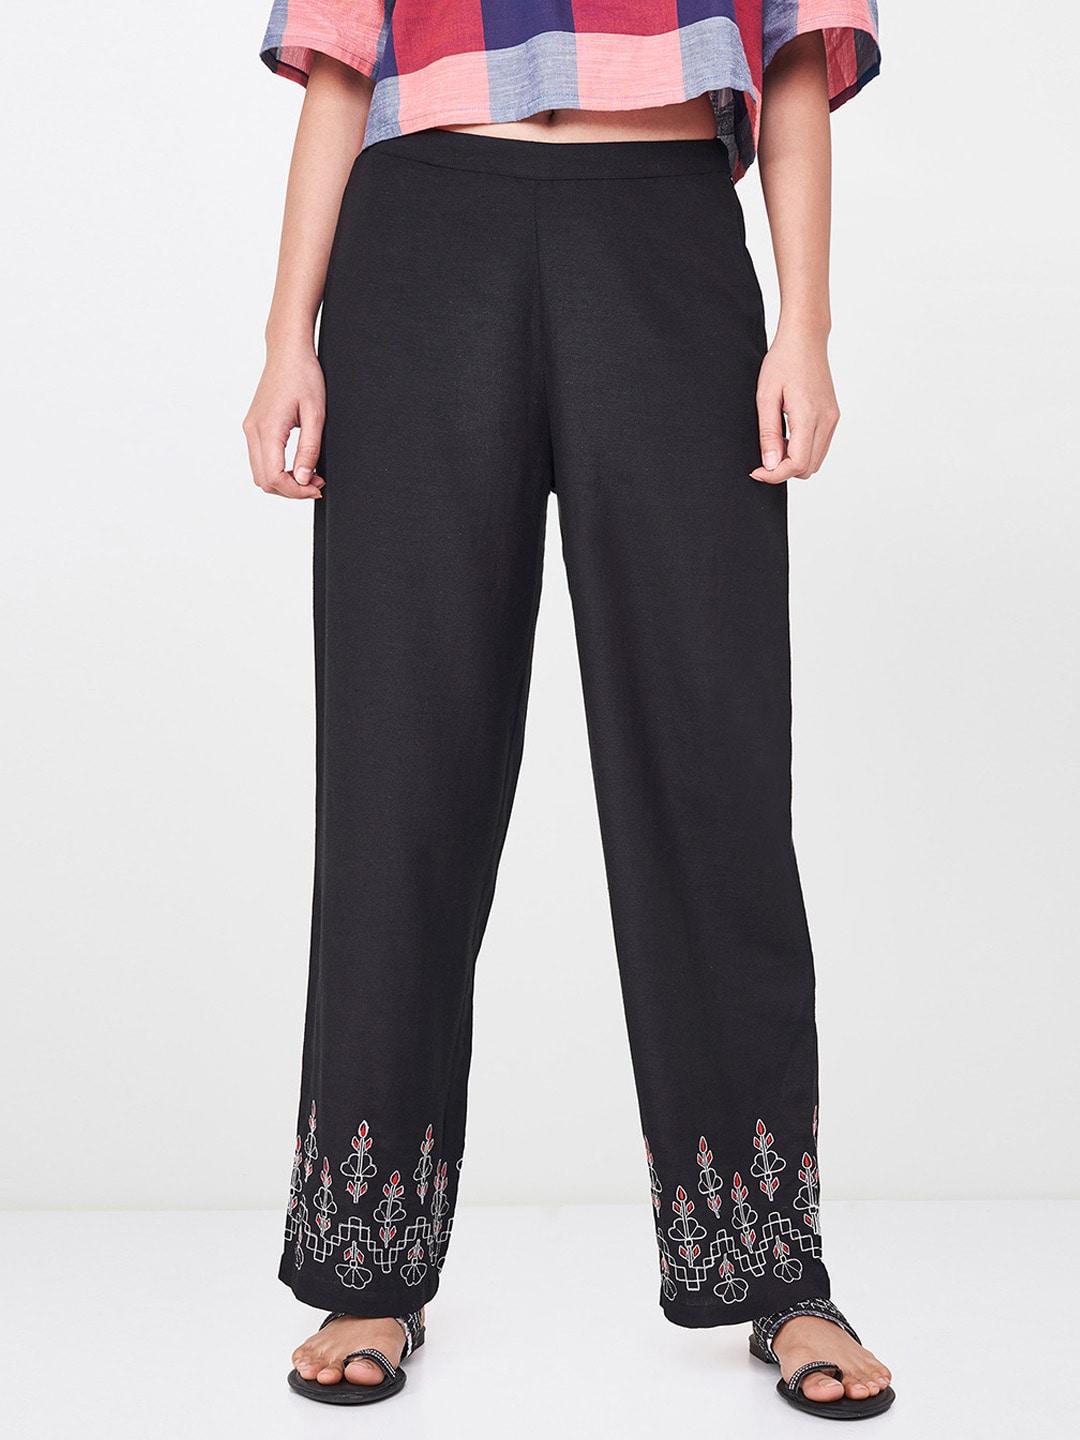 global-desi-women-black-regular-fit-embroidered-parallel-trousers